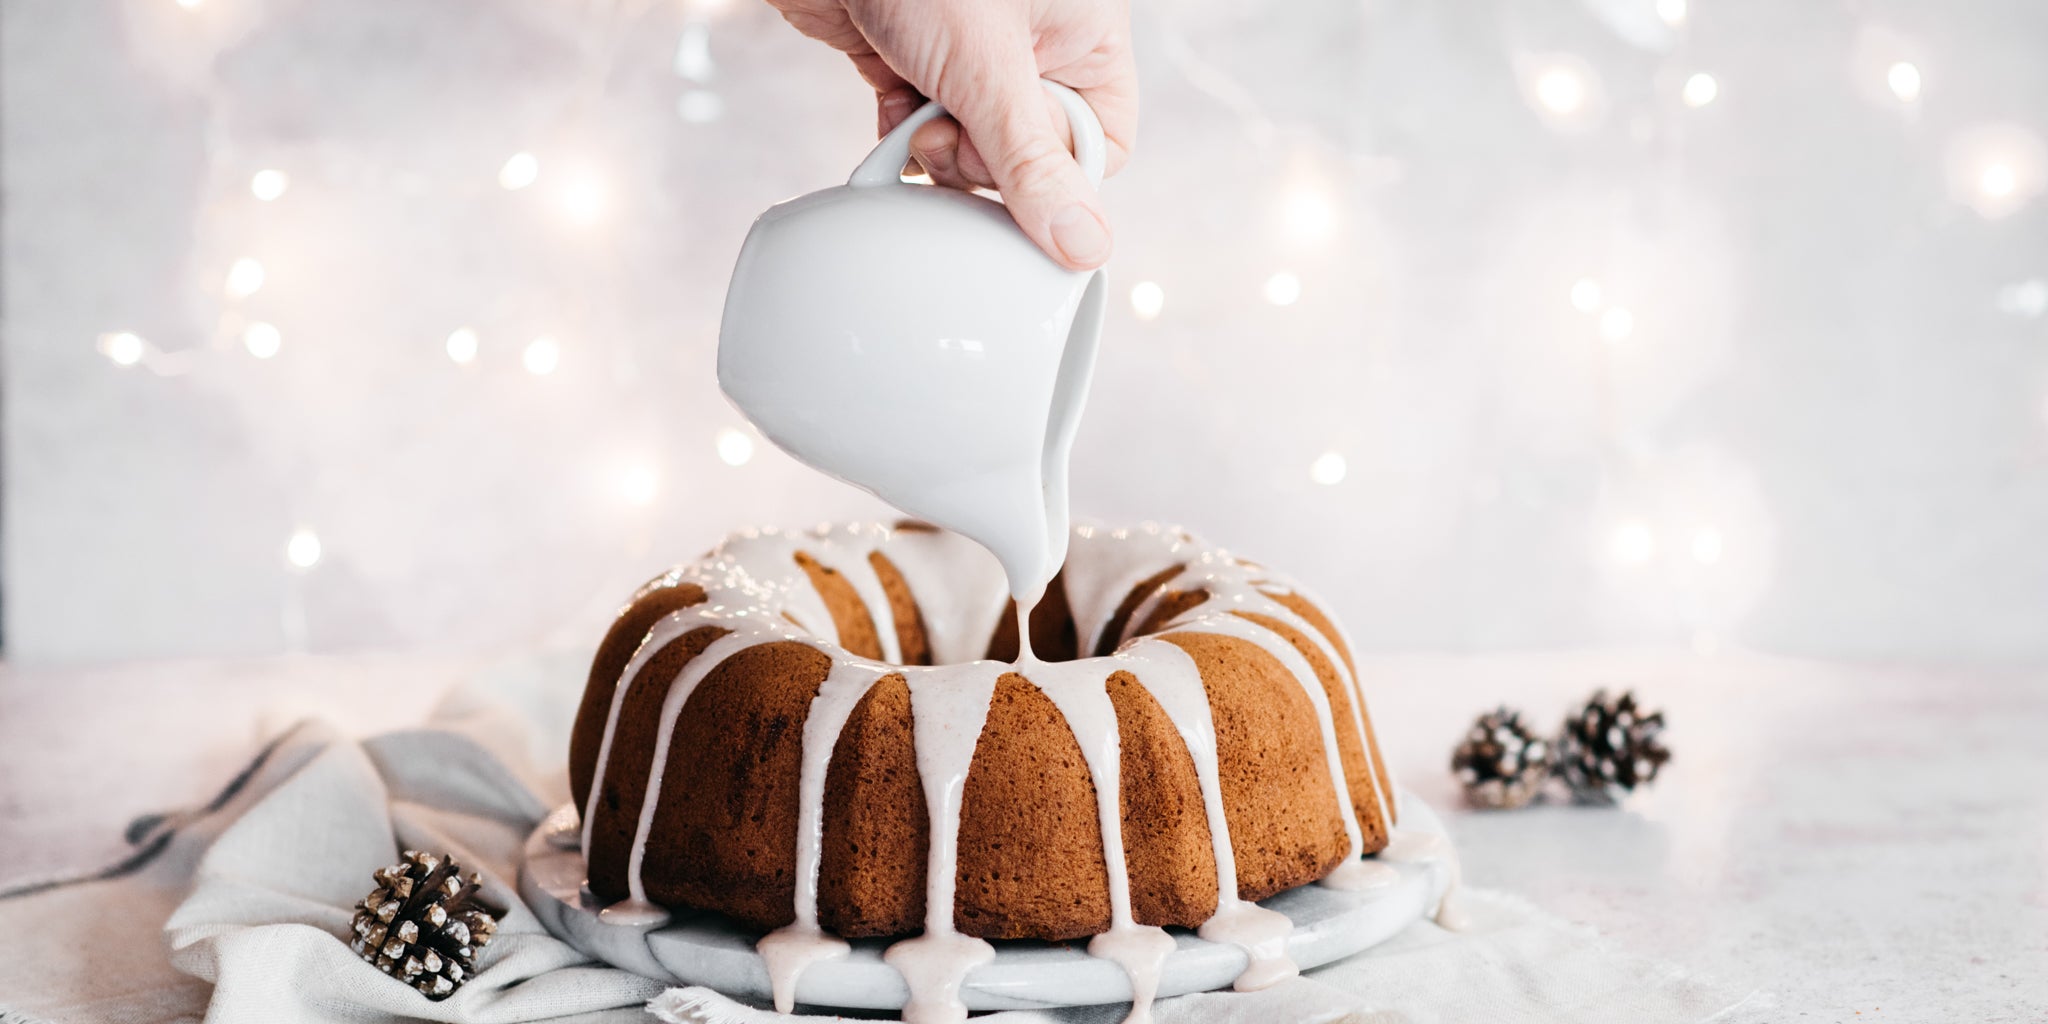 Hand pouring icing from a jug over the top of the gingerbread bundt cake